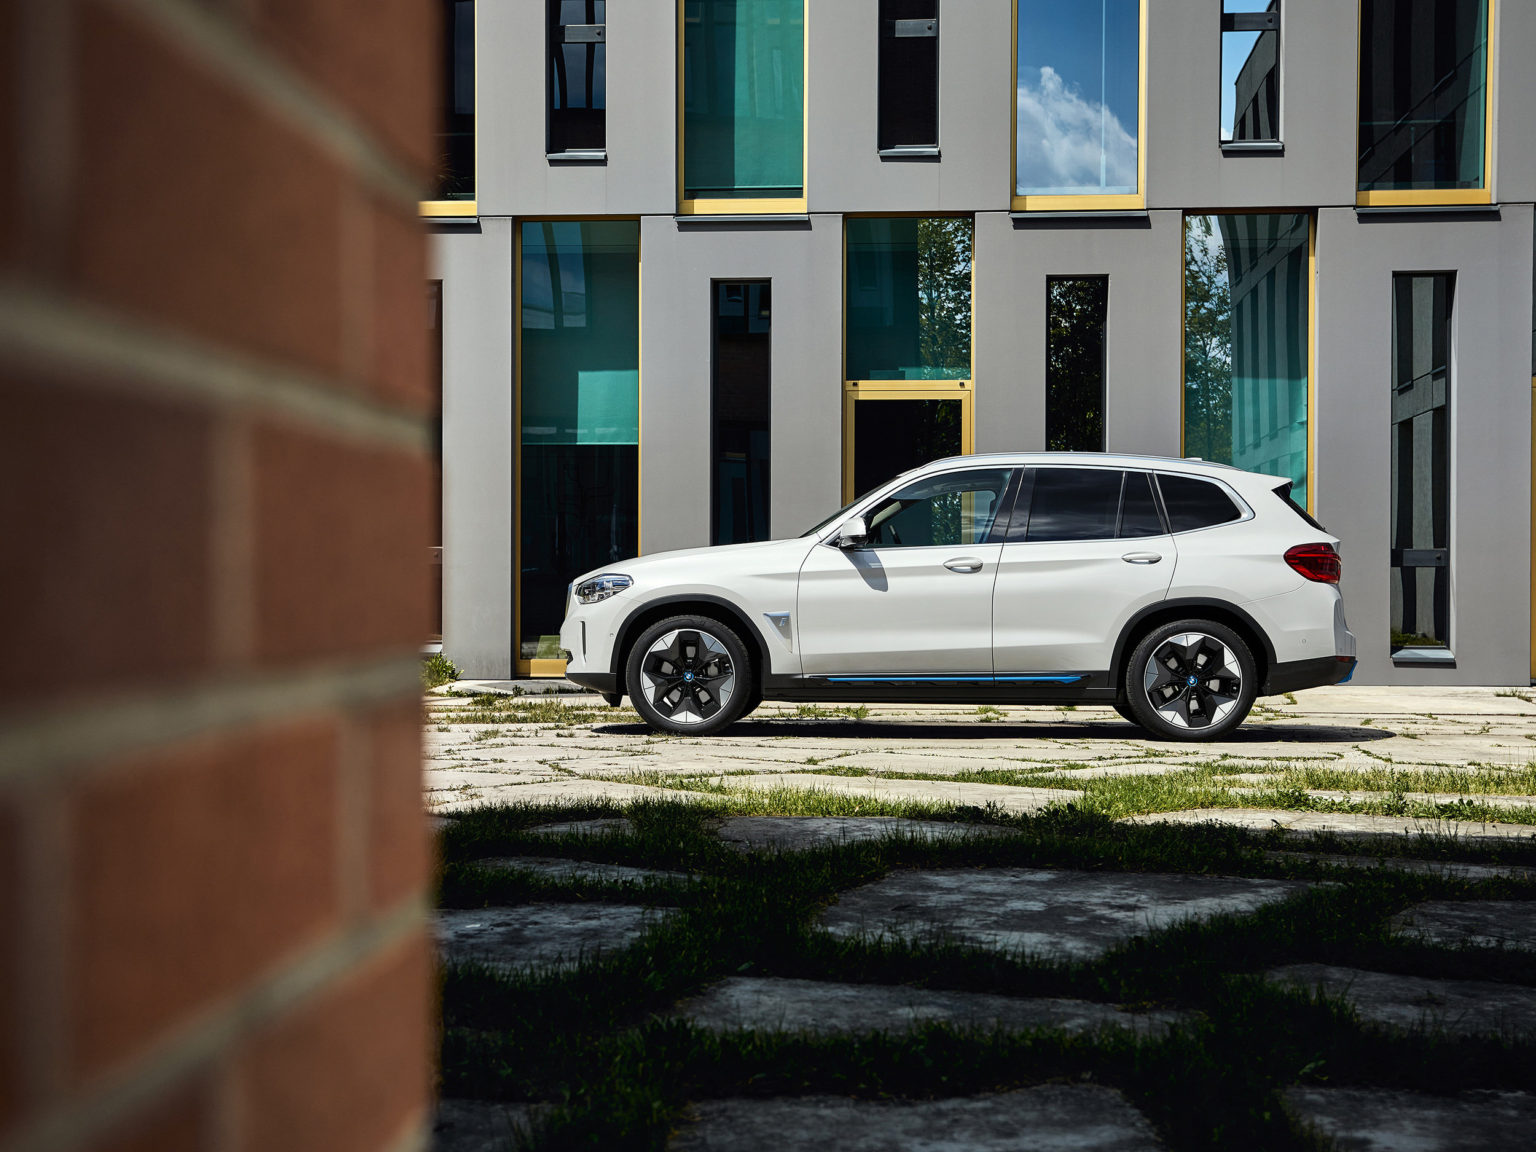 BMW's new SUV is fuel-efficient, but that's not a good enough reason to bring it to the U.S.